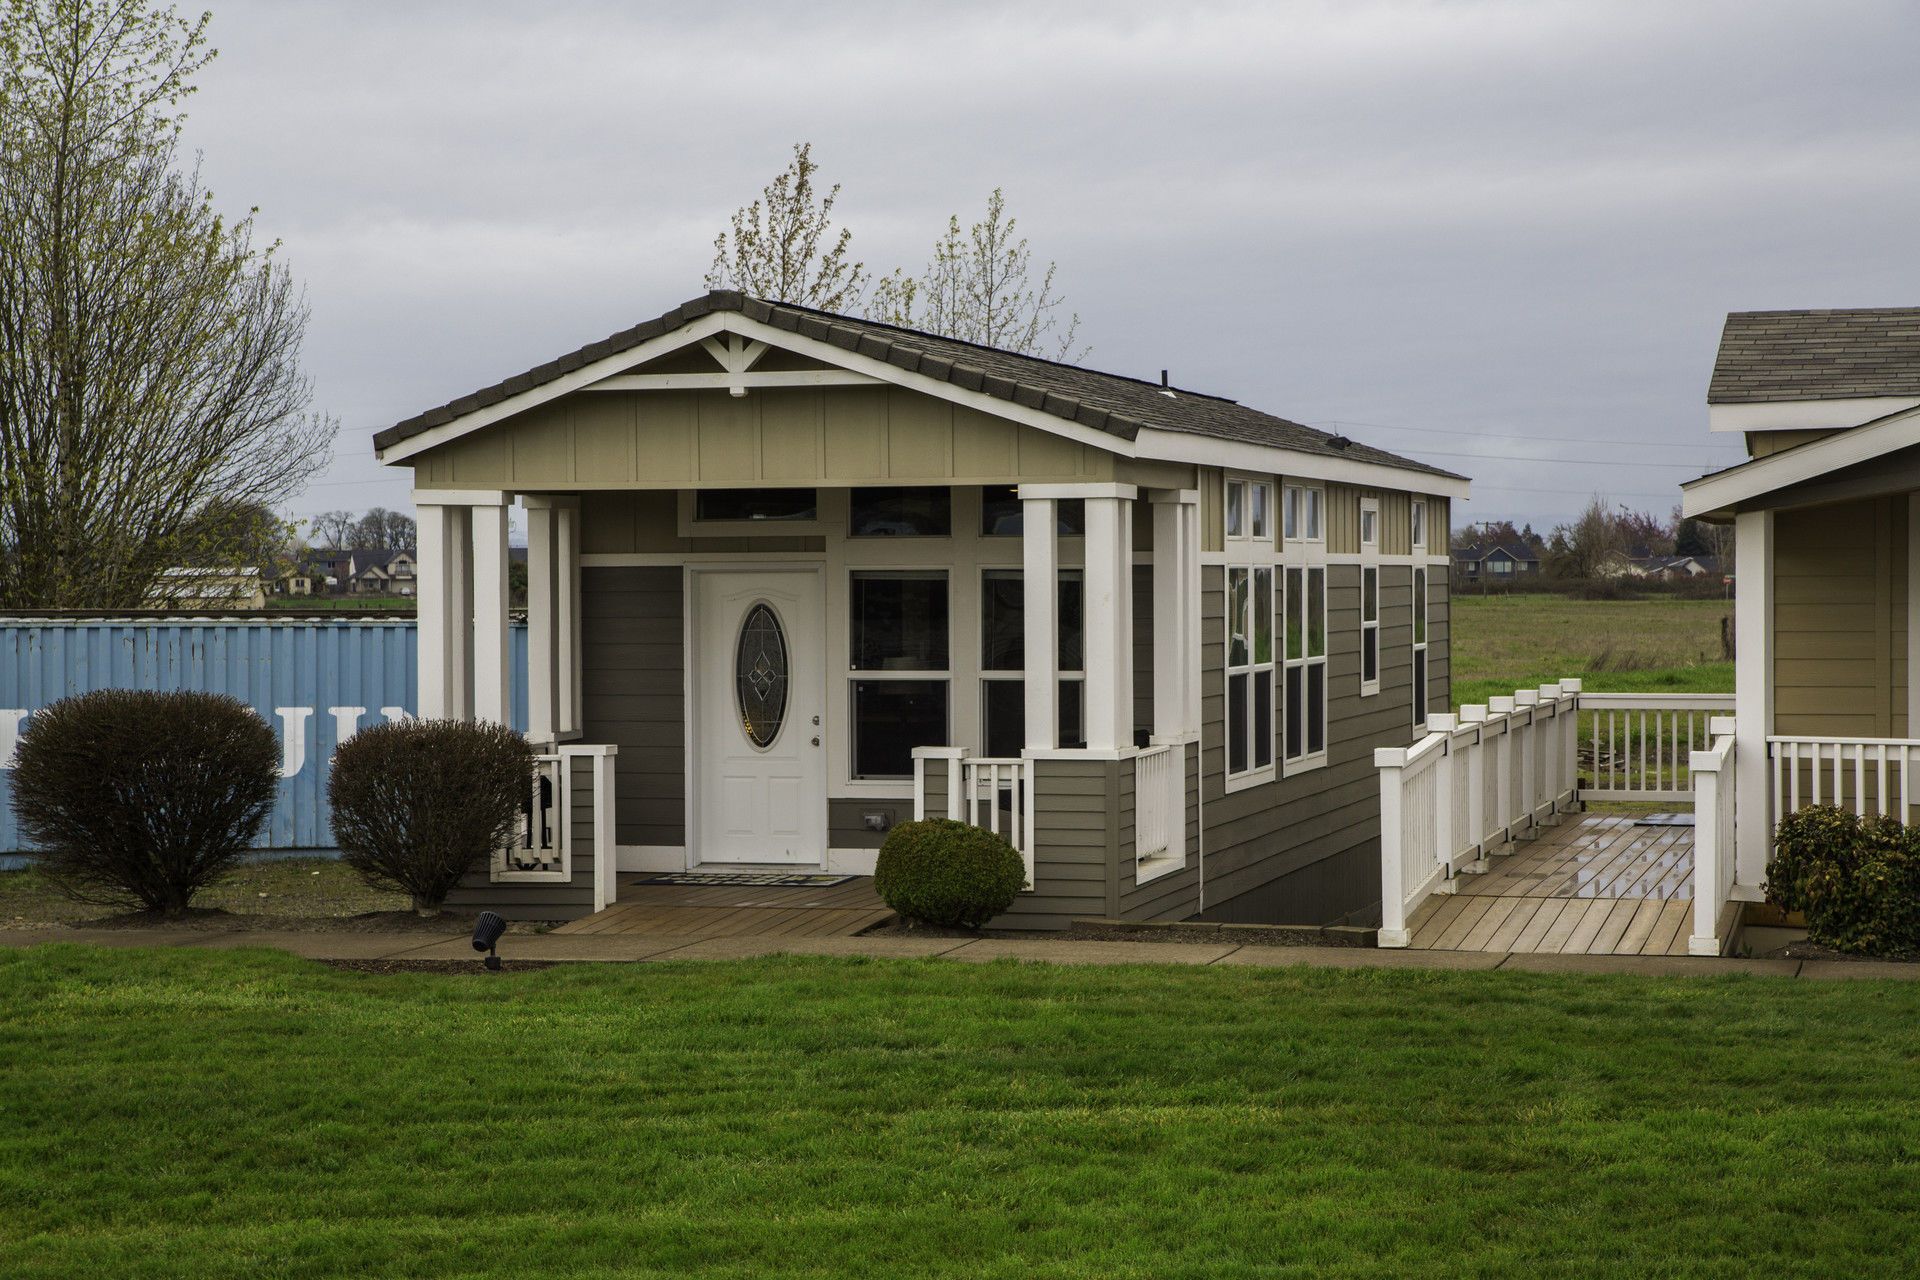 Best Mobile Home on Clearance Available Now - Explore Now